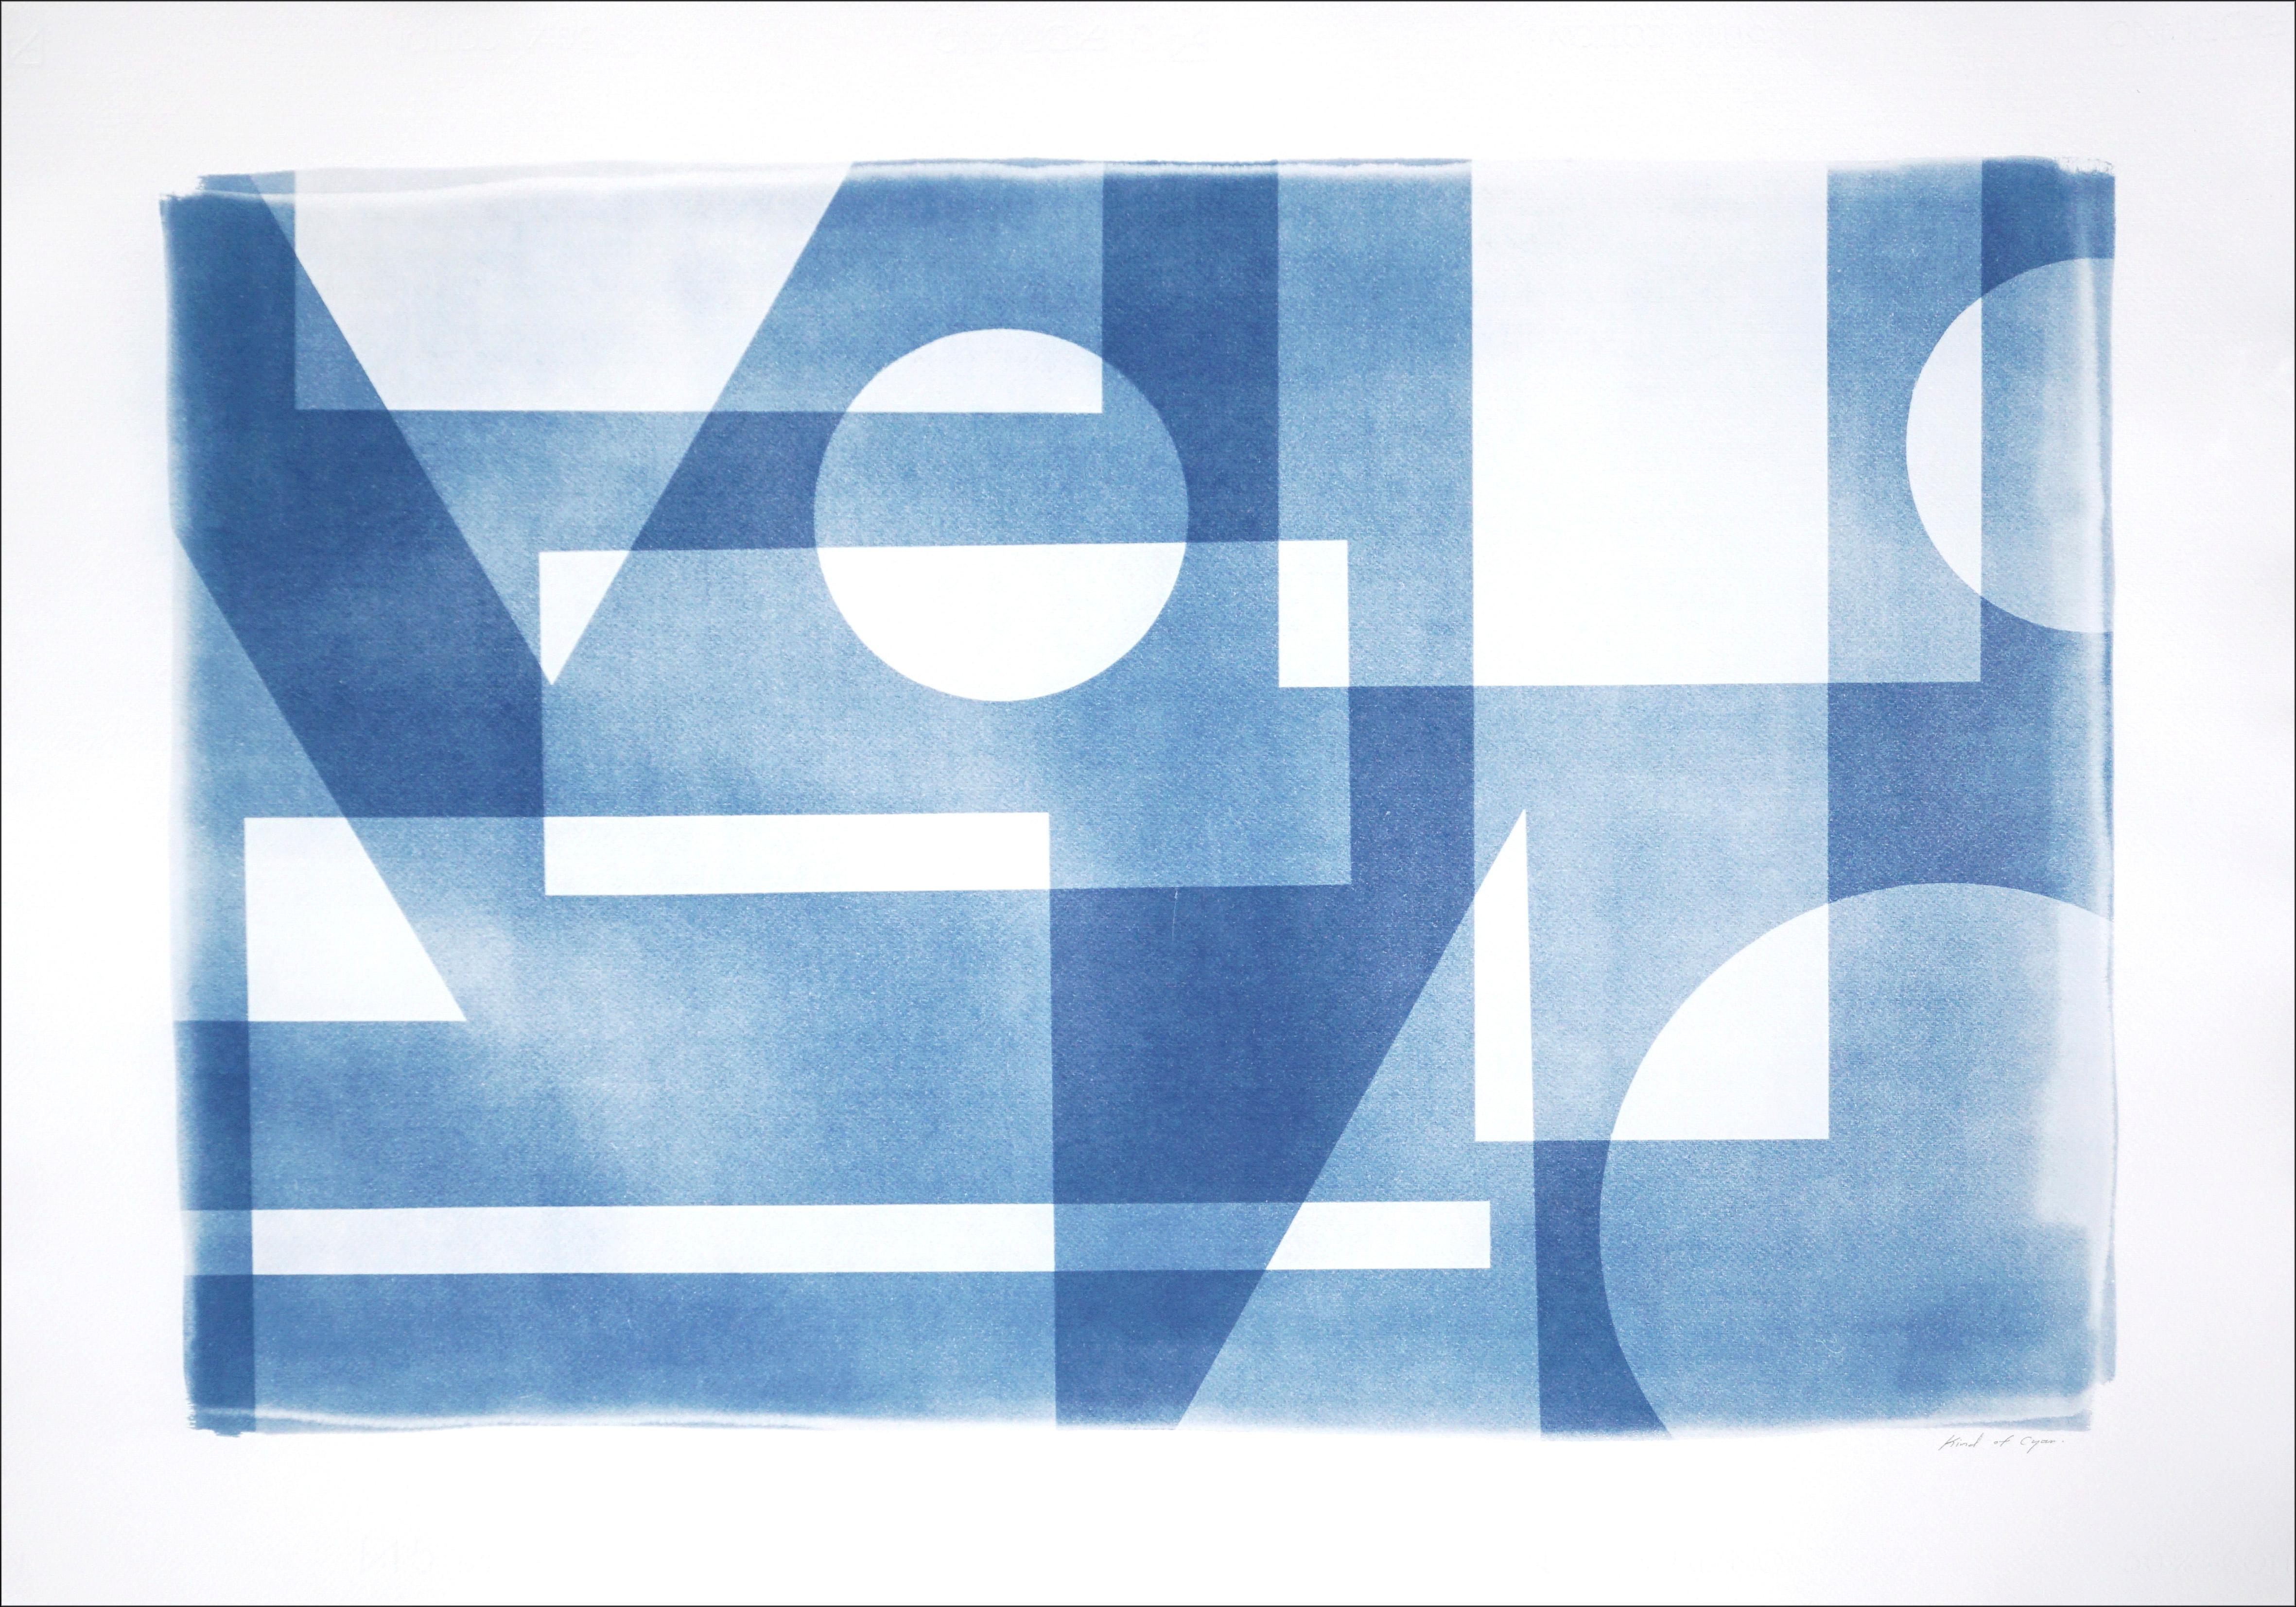 Abstract Geometric Cyanotype in Blue, Horizontal Architecture, Primary Shapes